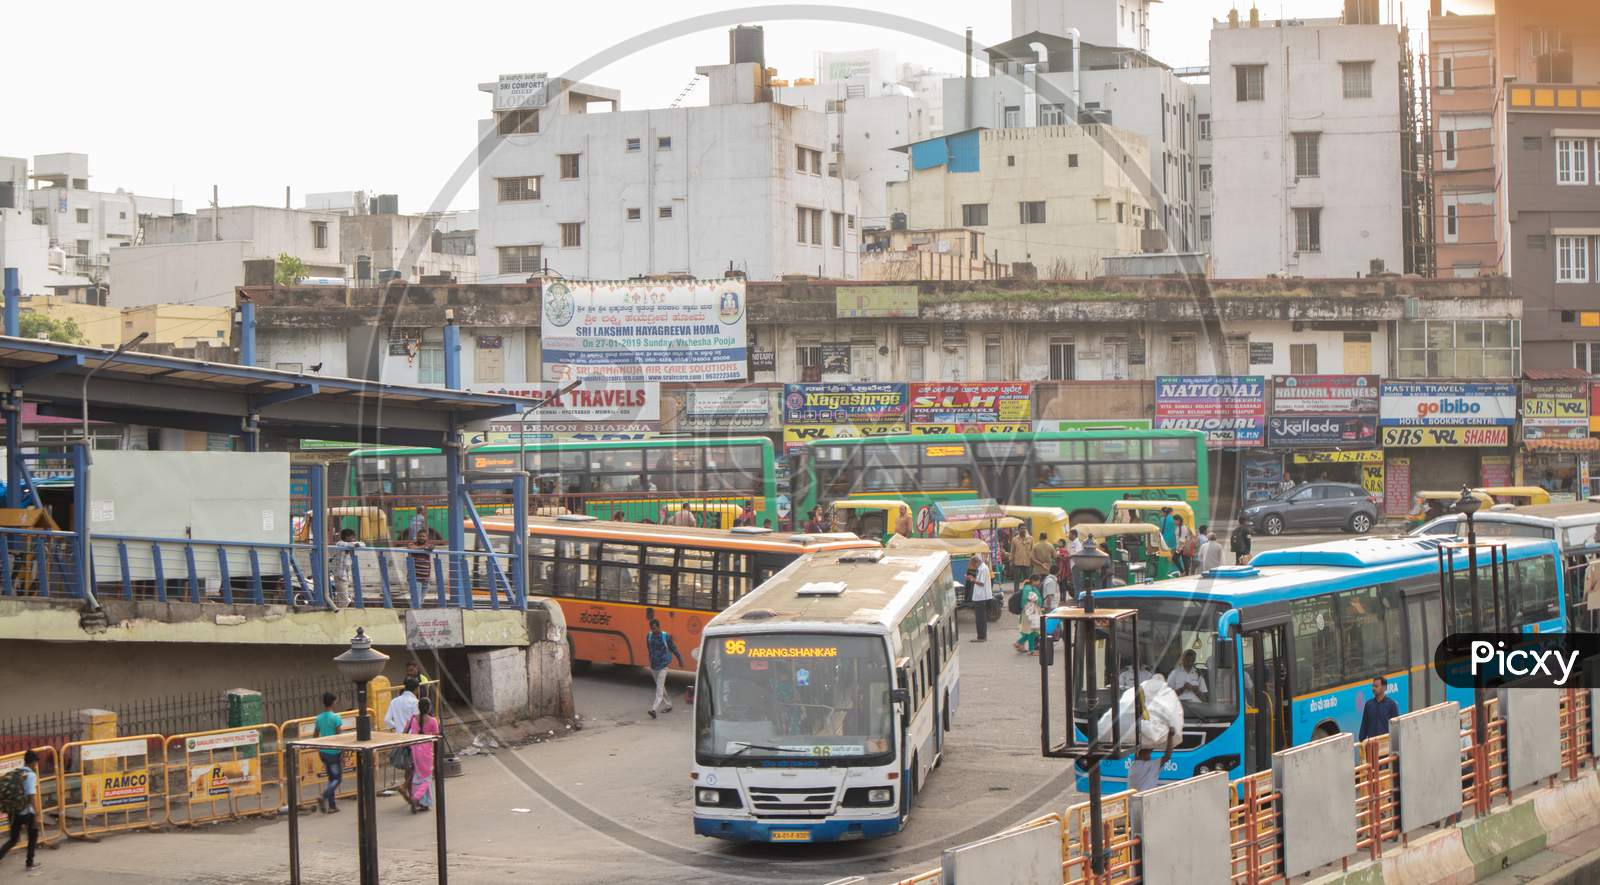 Bangalore India June 3, 2019:Buses Entering Into The Kempegowda Bus Station Known As Majestic During Morning Time Traffic Congestion.